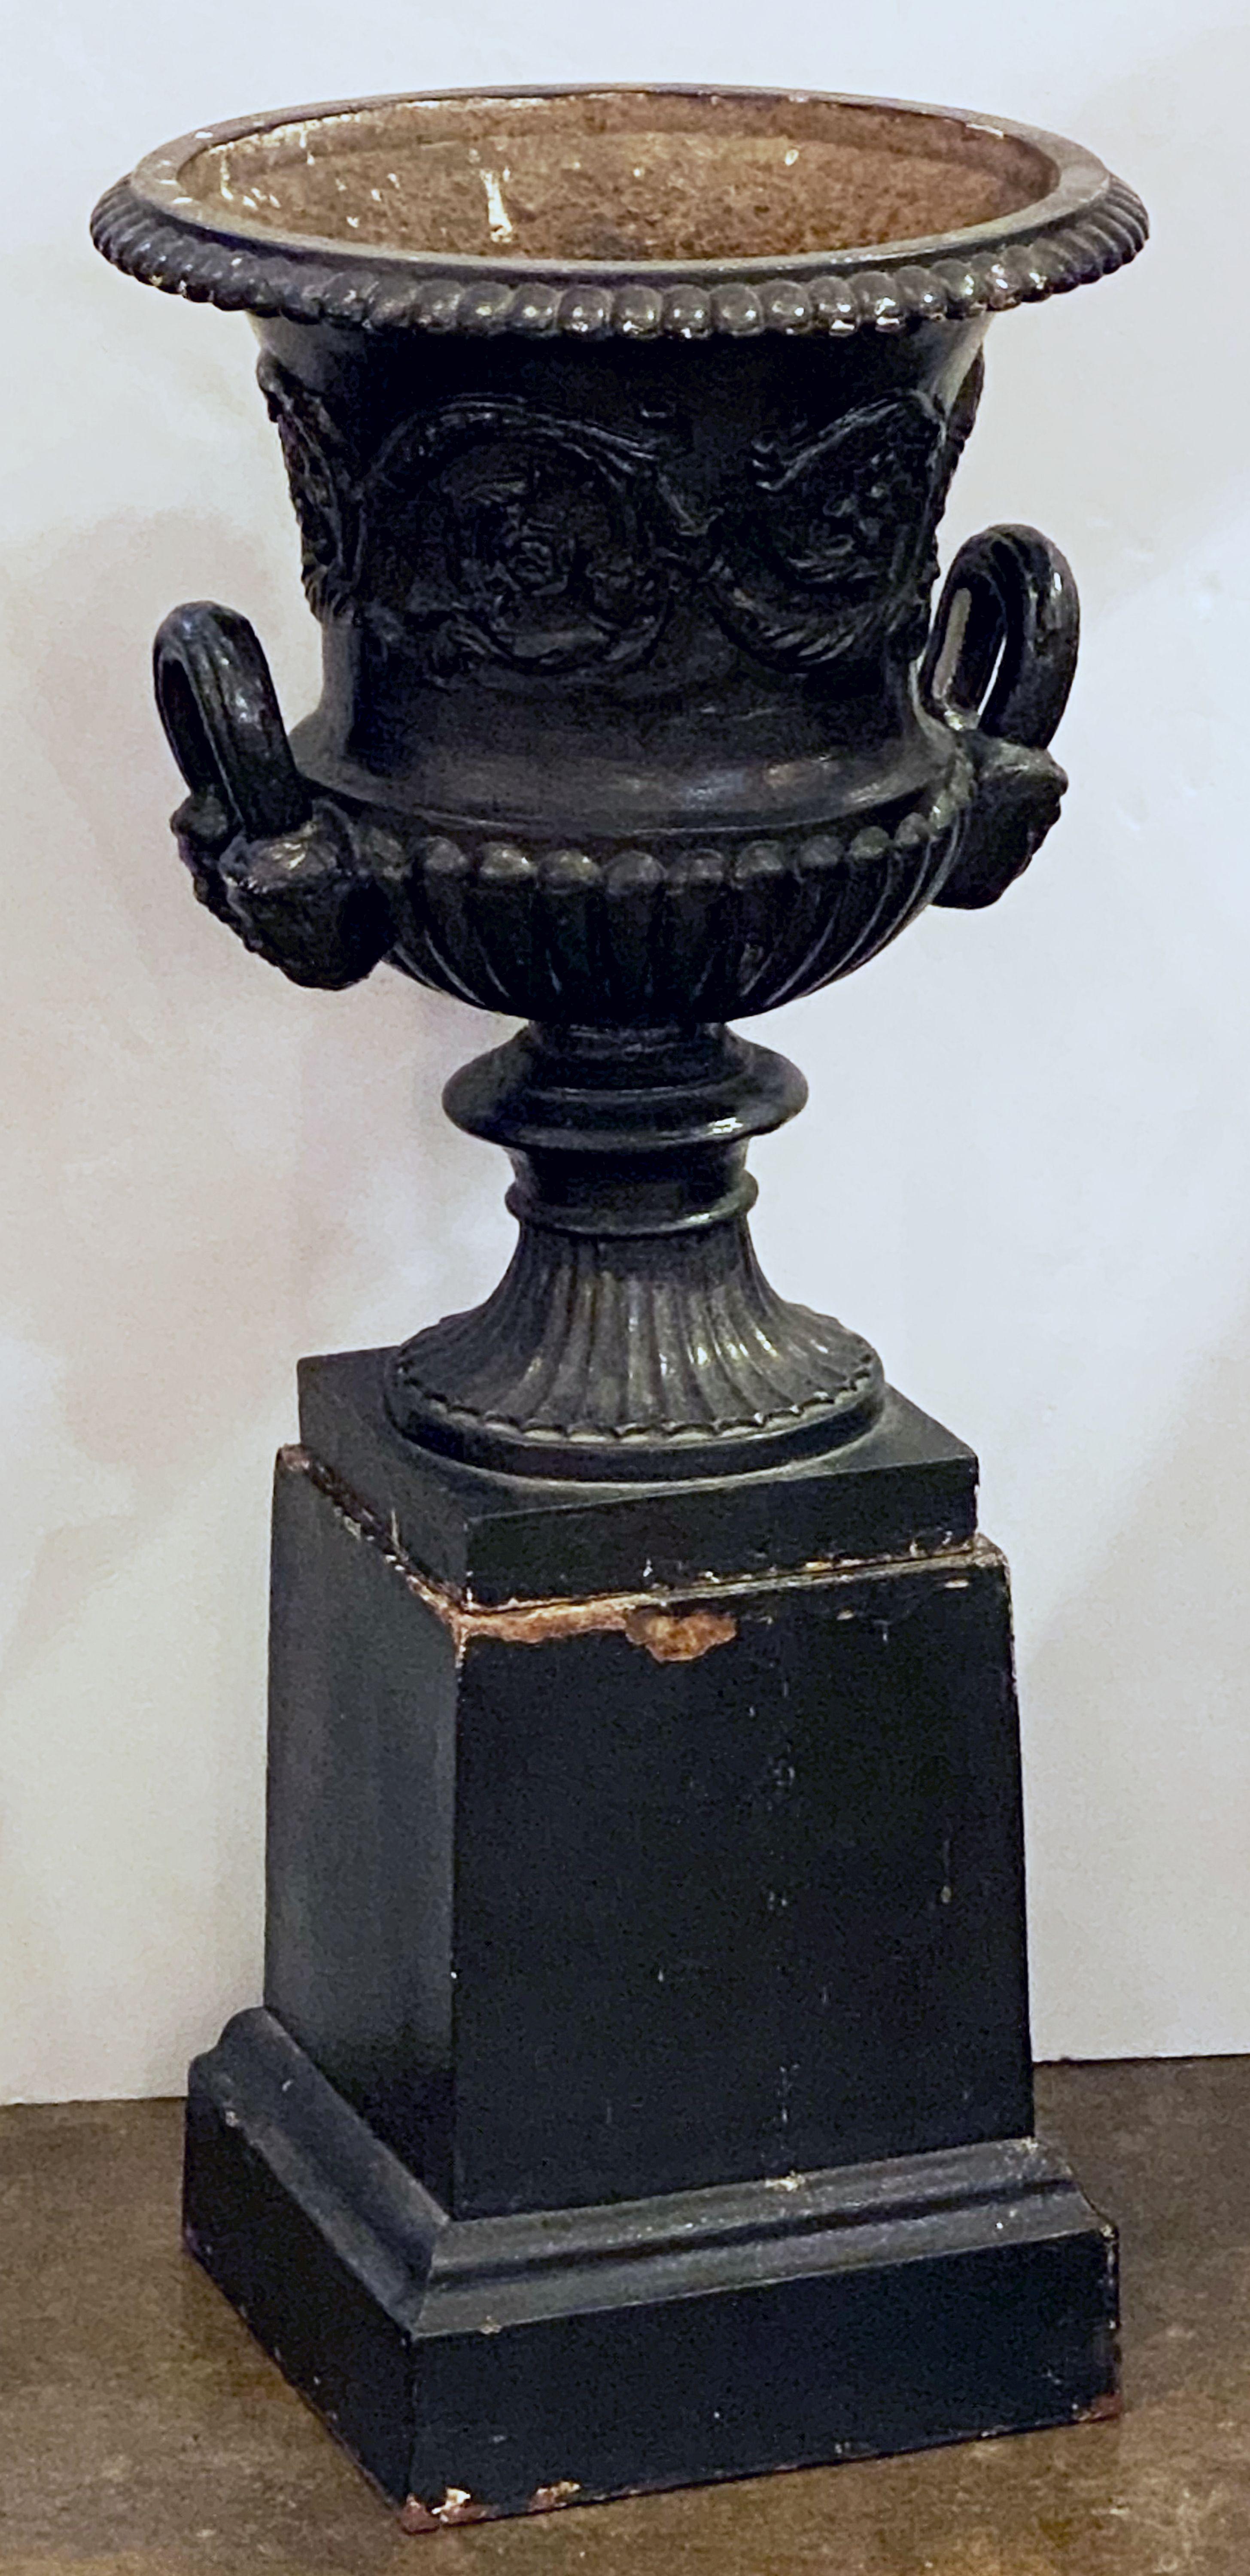 English Cast Iron Urns on Plinths from the Regency Era, Individually Priced 9